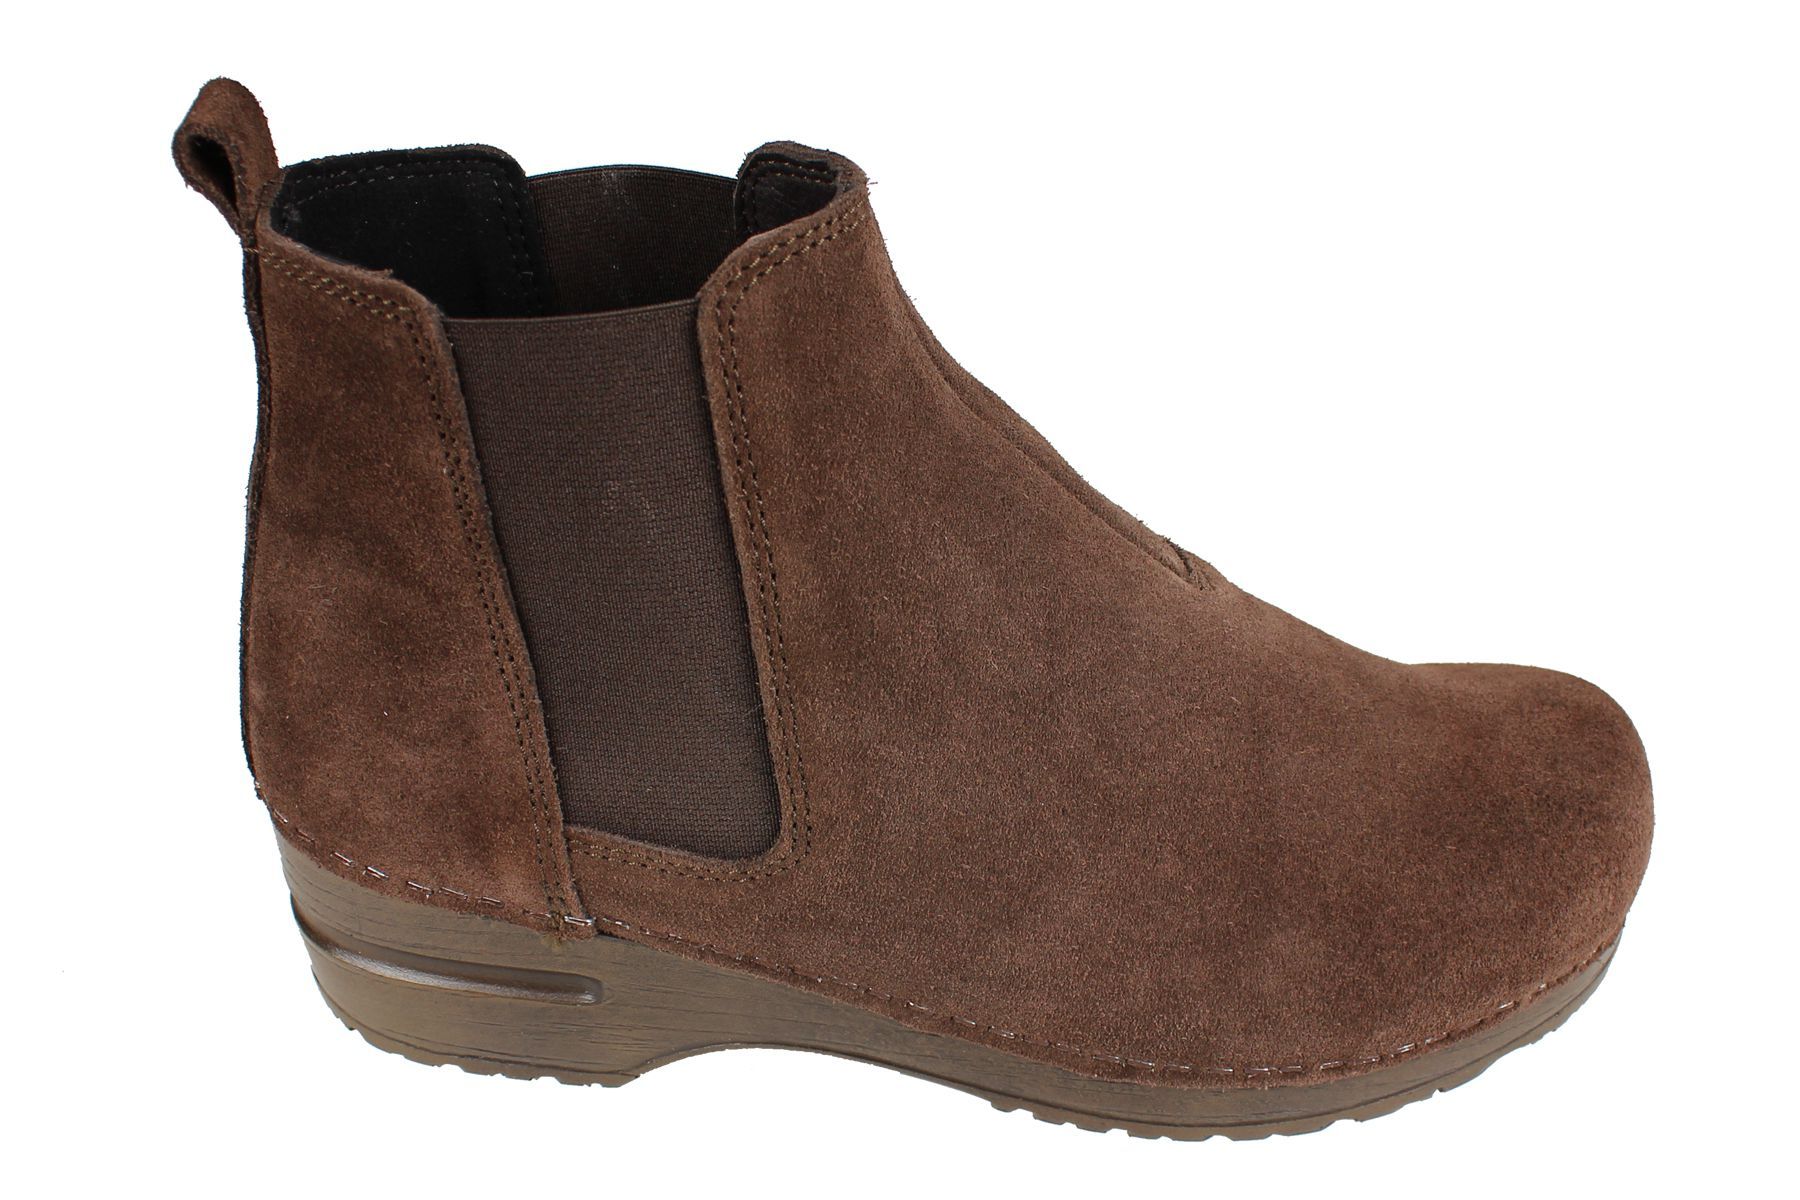 Sanita Vaika Soft Sole Boot in Suede Leather in Antique Brown